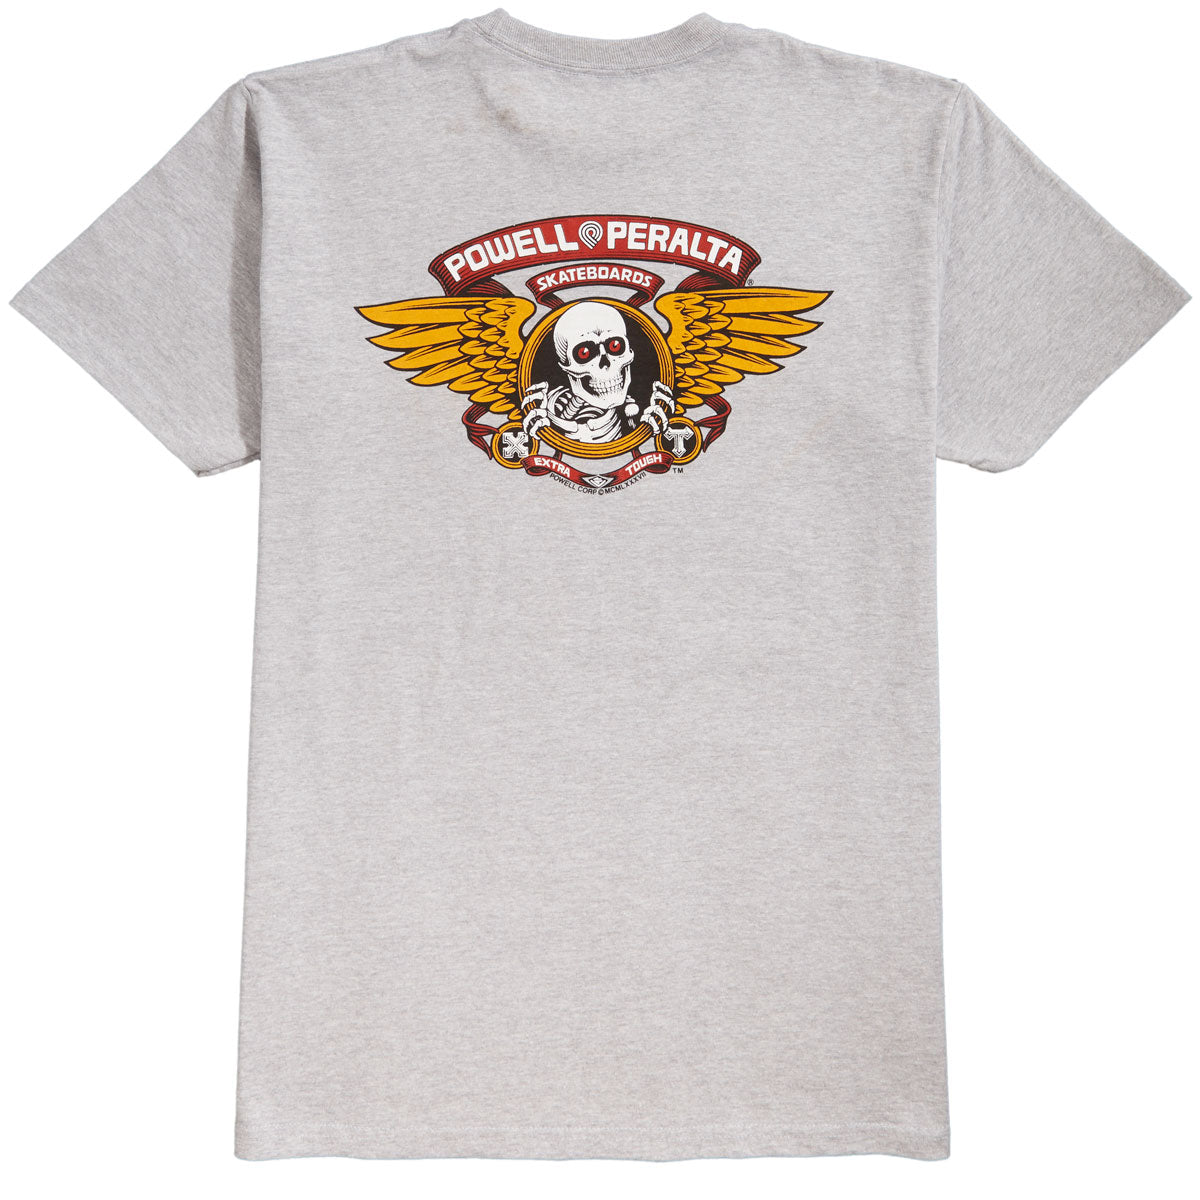 Powell-Peralta Winged Ripper T-Shirt - Athletic Heather image 1